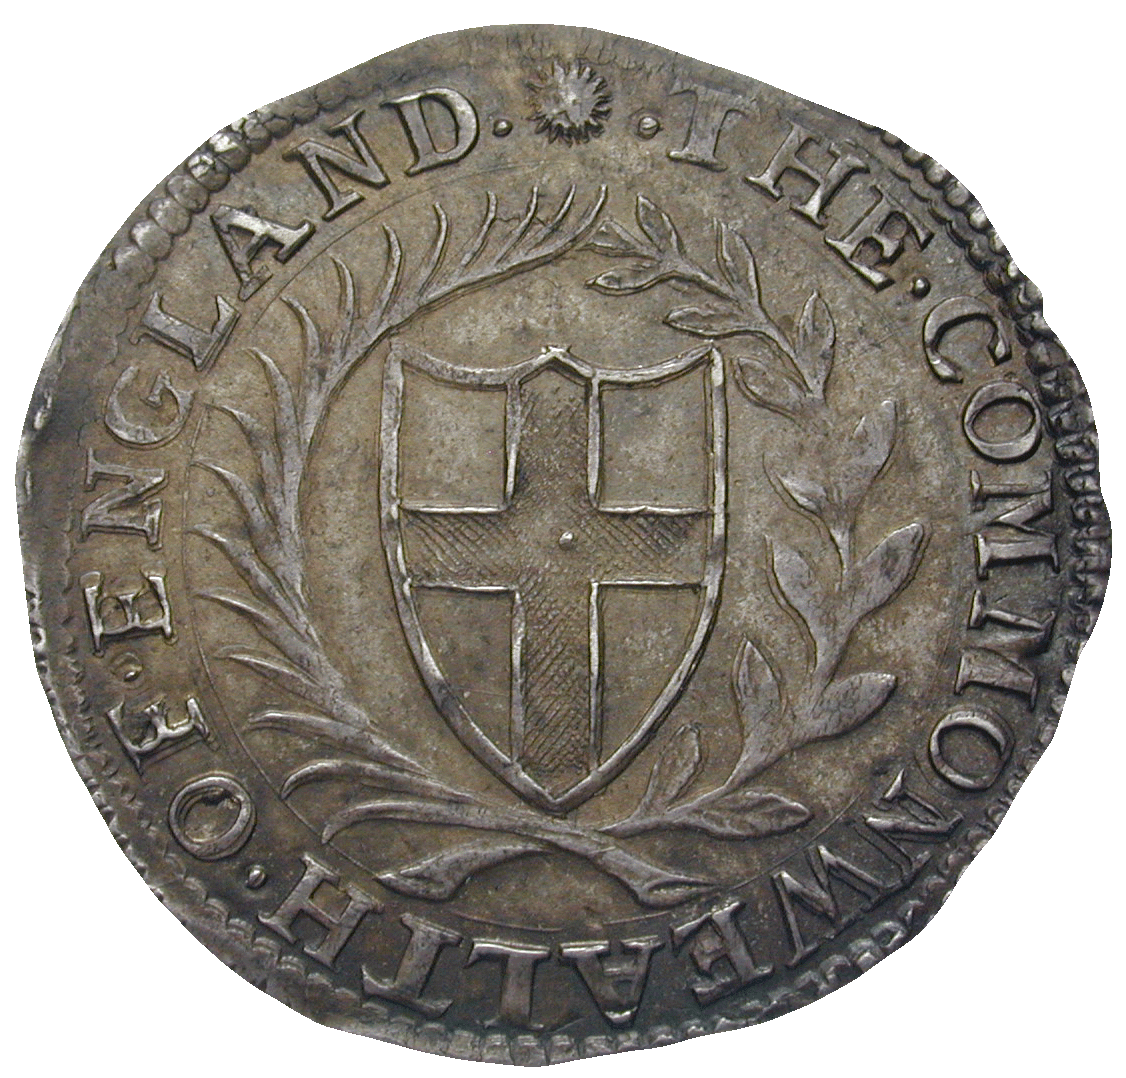 Commonwealth of England, Sixpence 1653 (obverse)